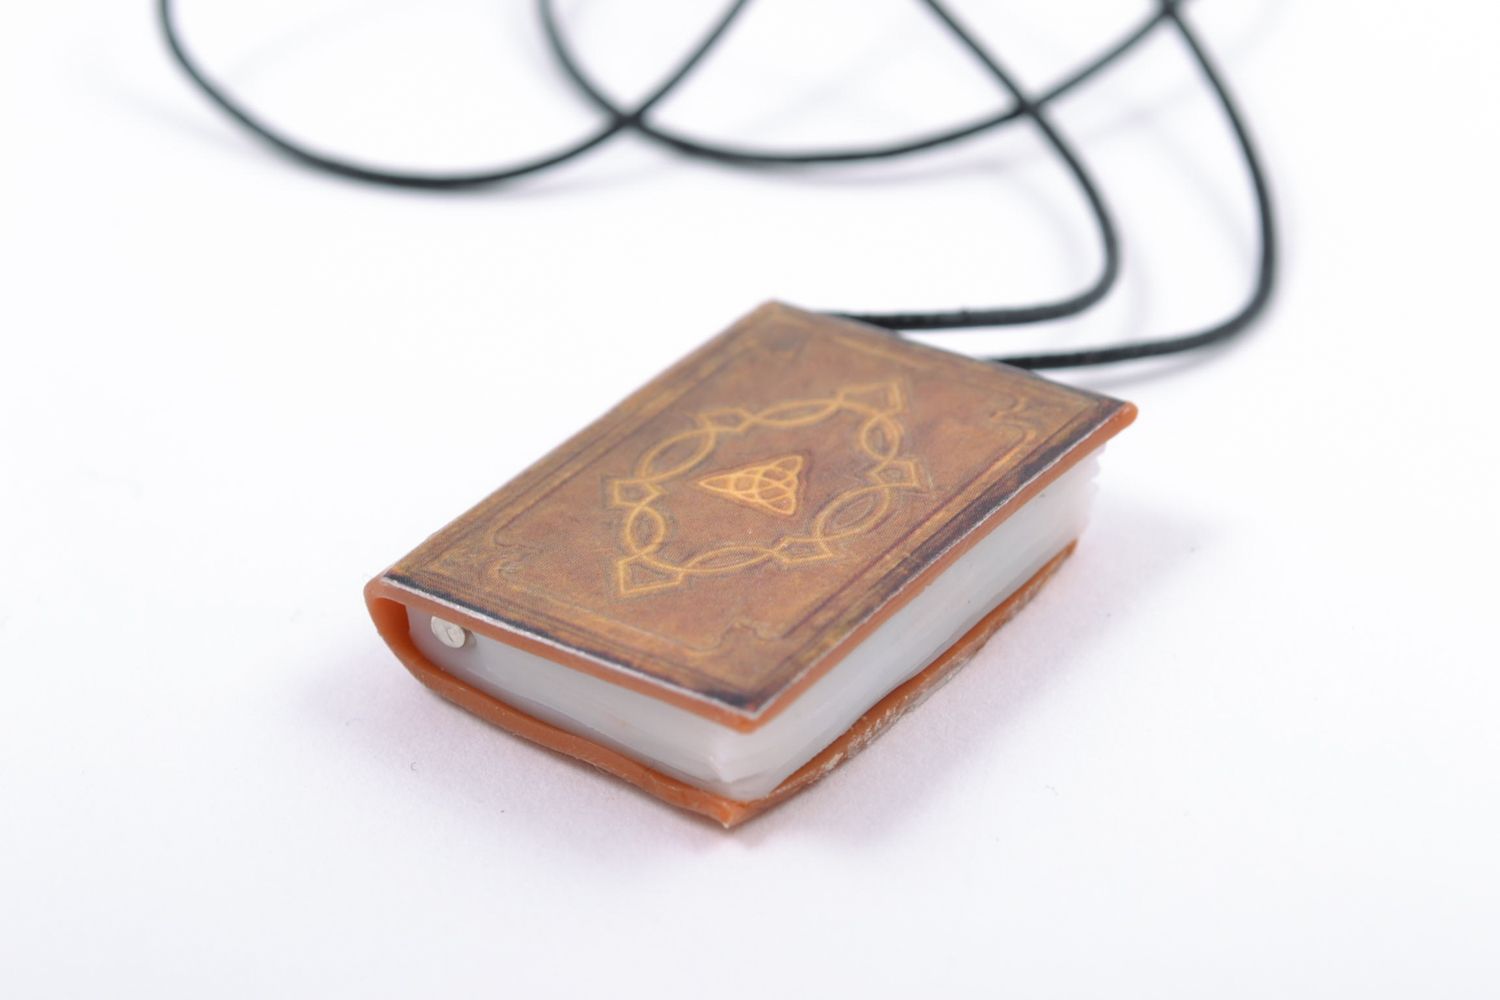 Polymer clay pendant in the shape of book with leather cord photo 3